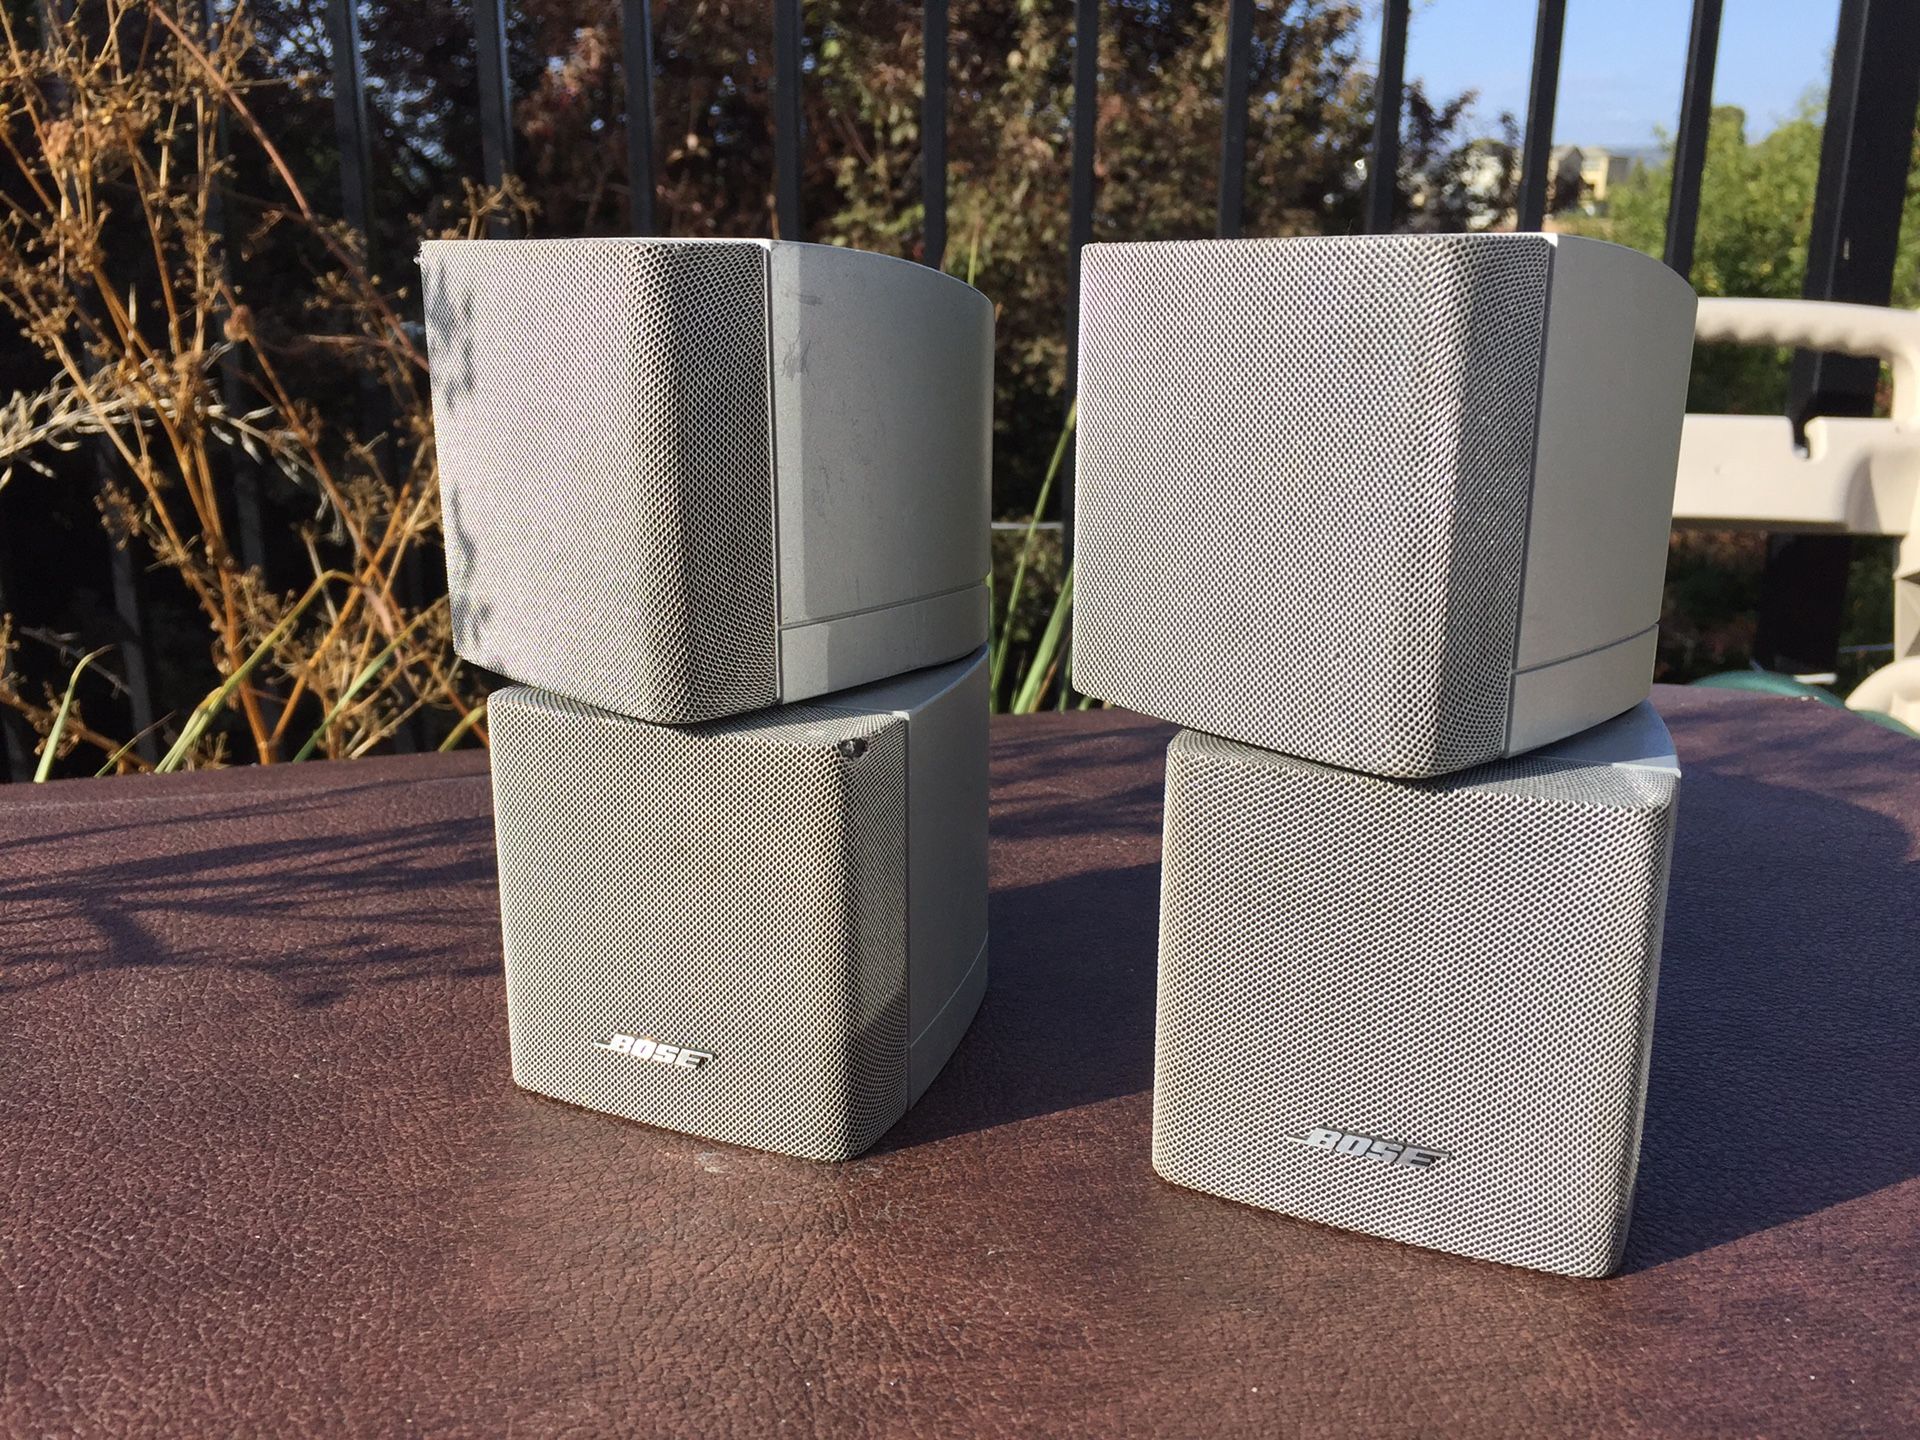 Bose doubleshot speakers working perfectly